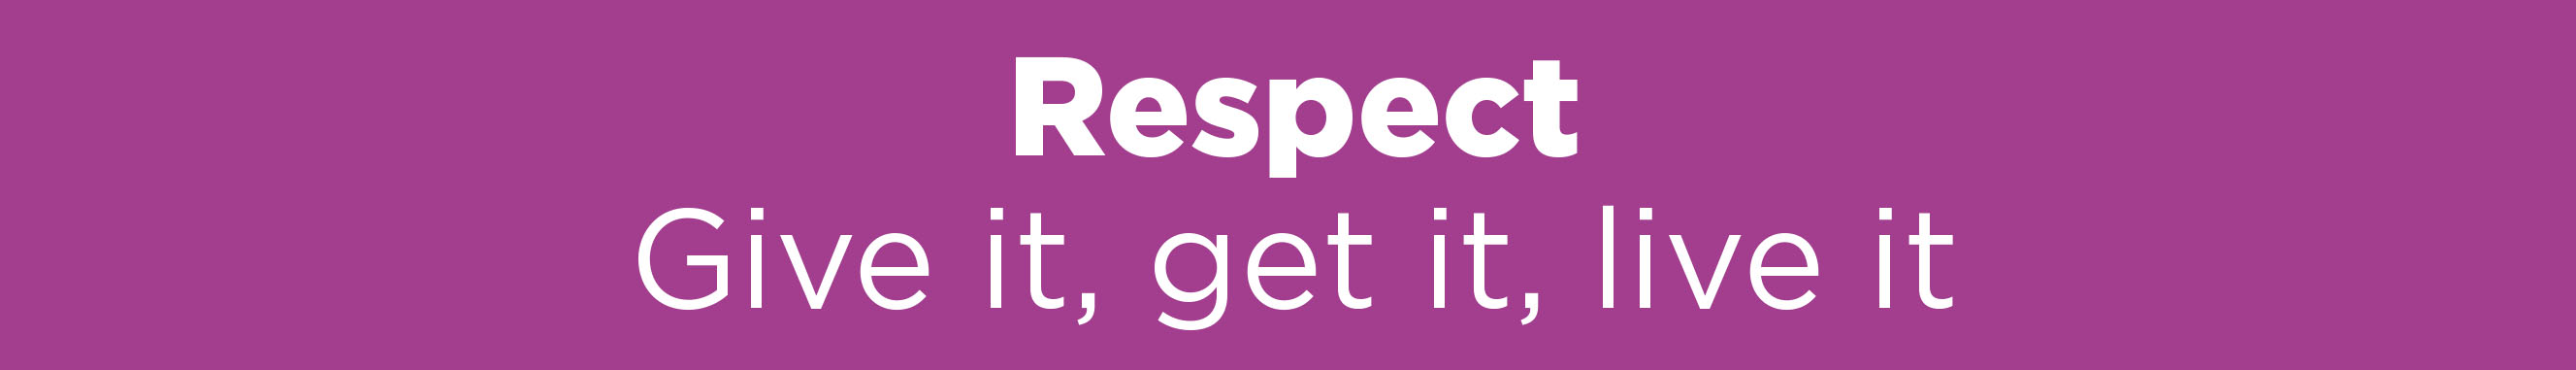 Respect - Give it, get it, live it